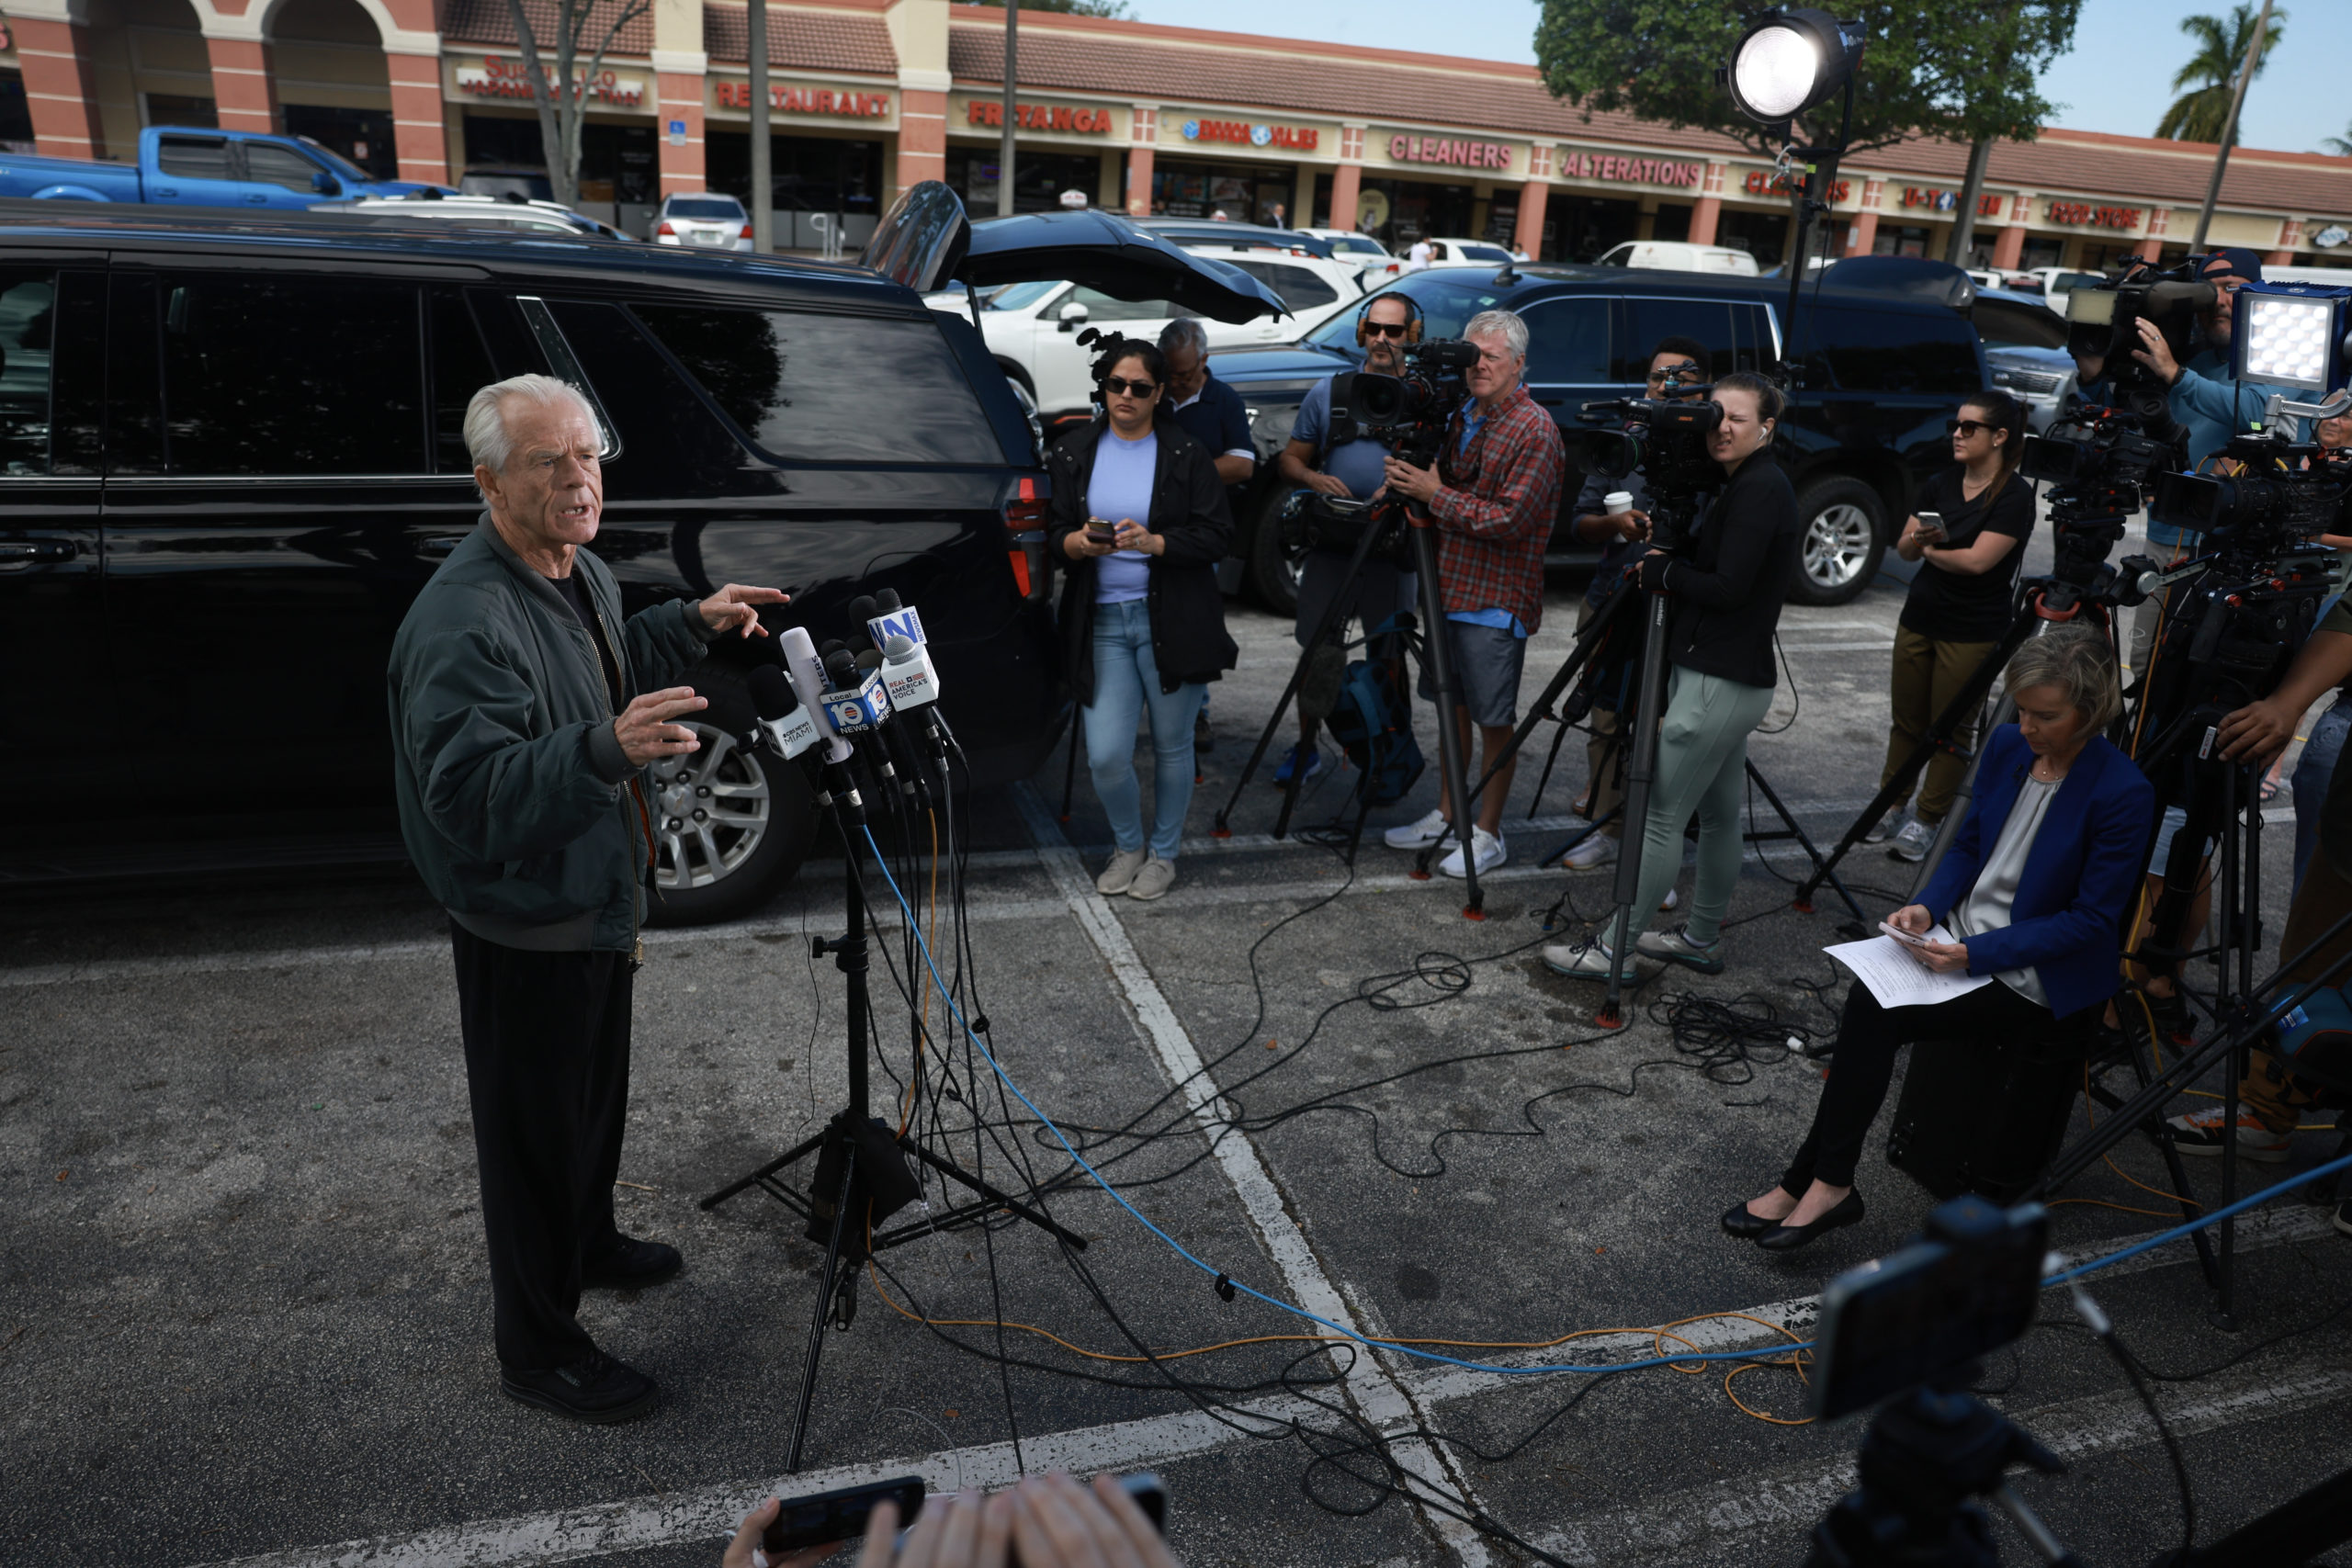 Former Donald Trump adviser Peter Navarro holds a press conference before turning himself in to a federal prison on March 19, 2024, in Miami, Florida. Mr. Navarro, who was convicted of contempt of Congress last year, surrendered at a federal Bureau of Prisons facility to begin serving his four-month sentence after speaking to the media. (Photo by Joe Raedle/Getty Images)